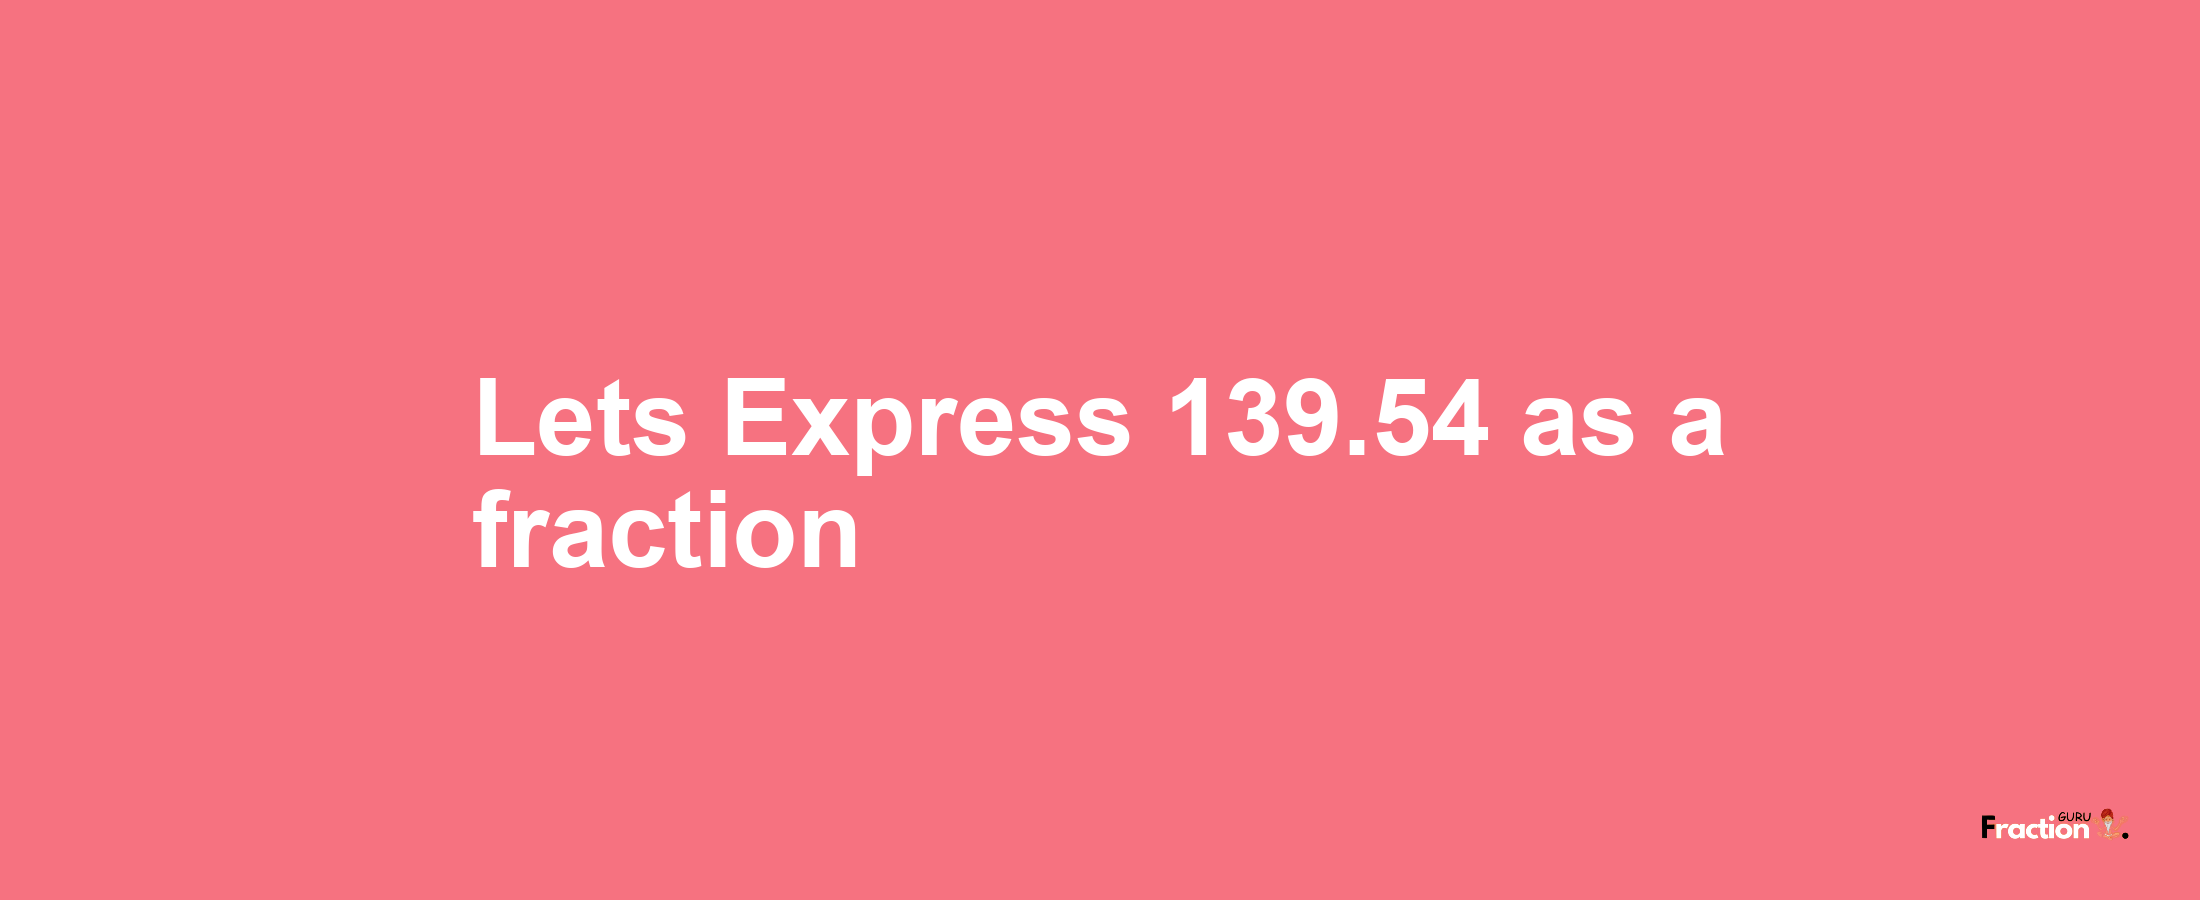 Lets Express 139.54 as afraction